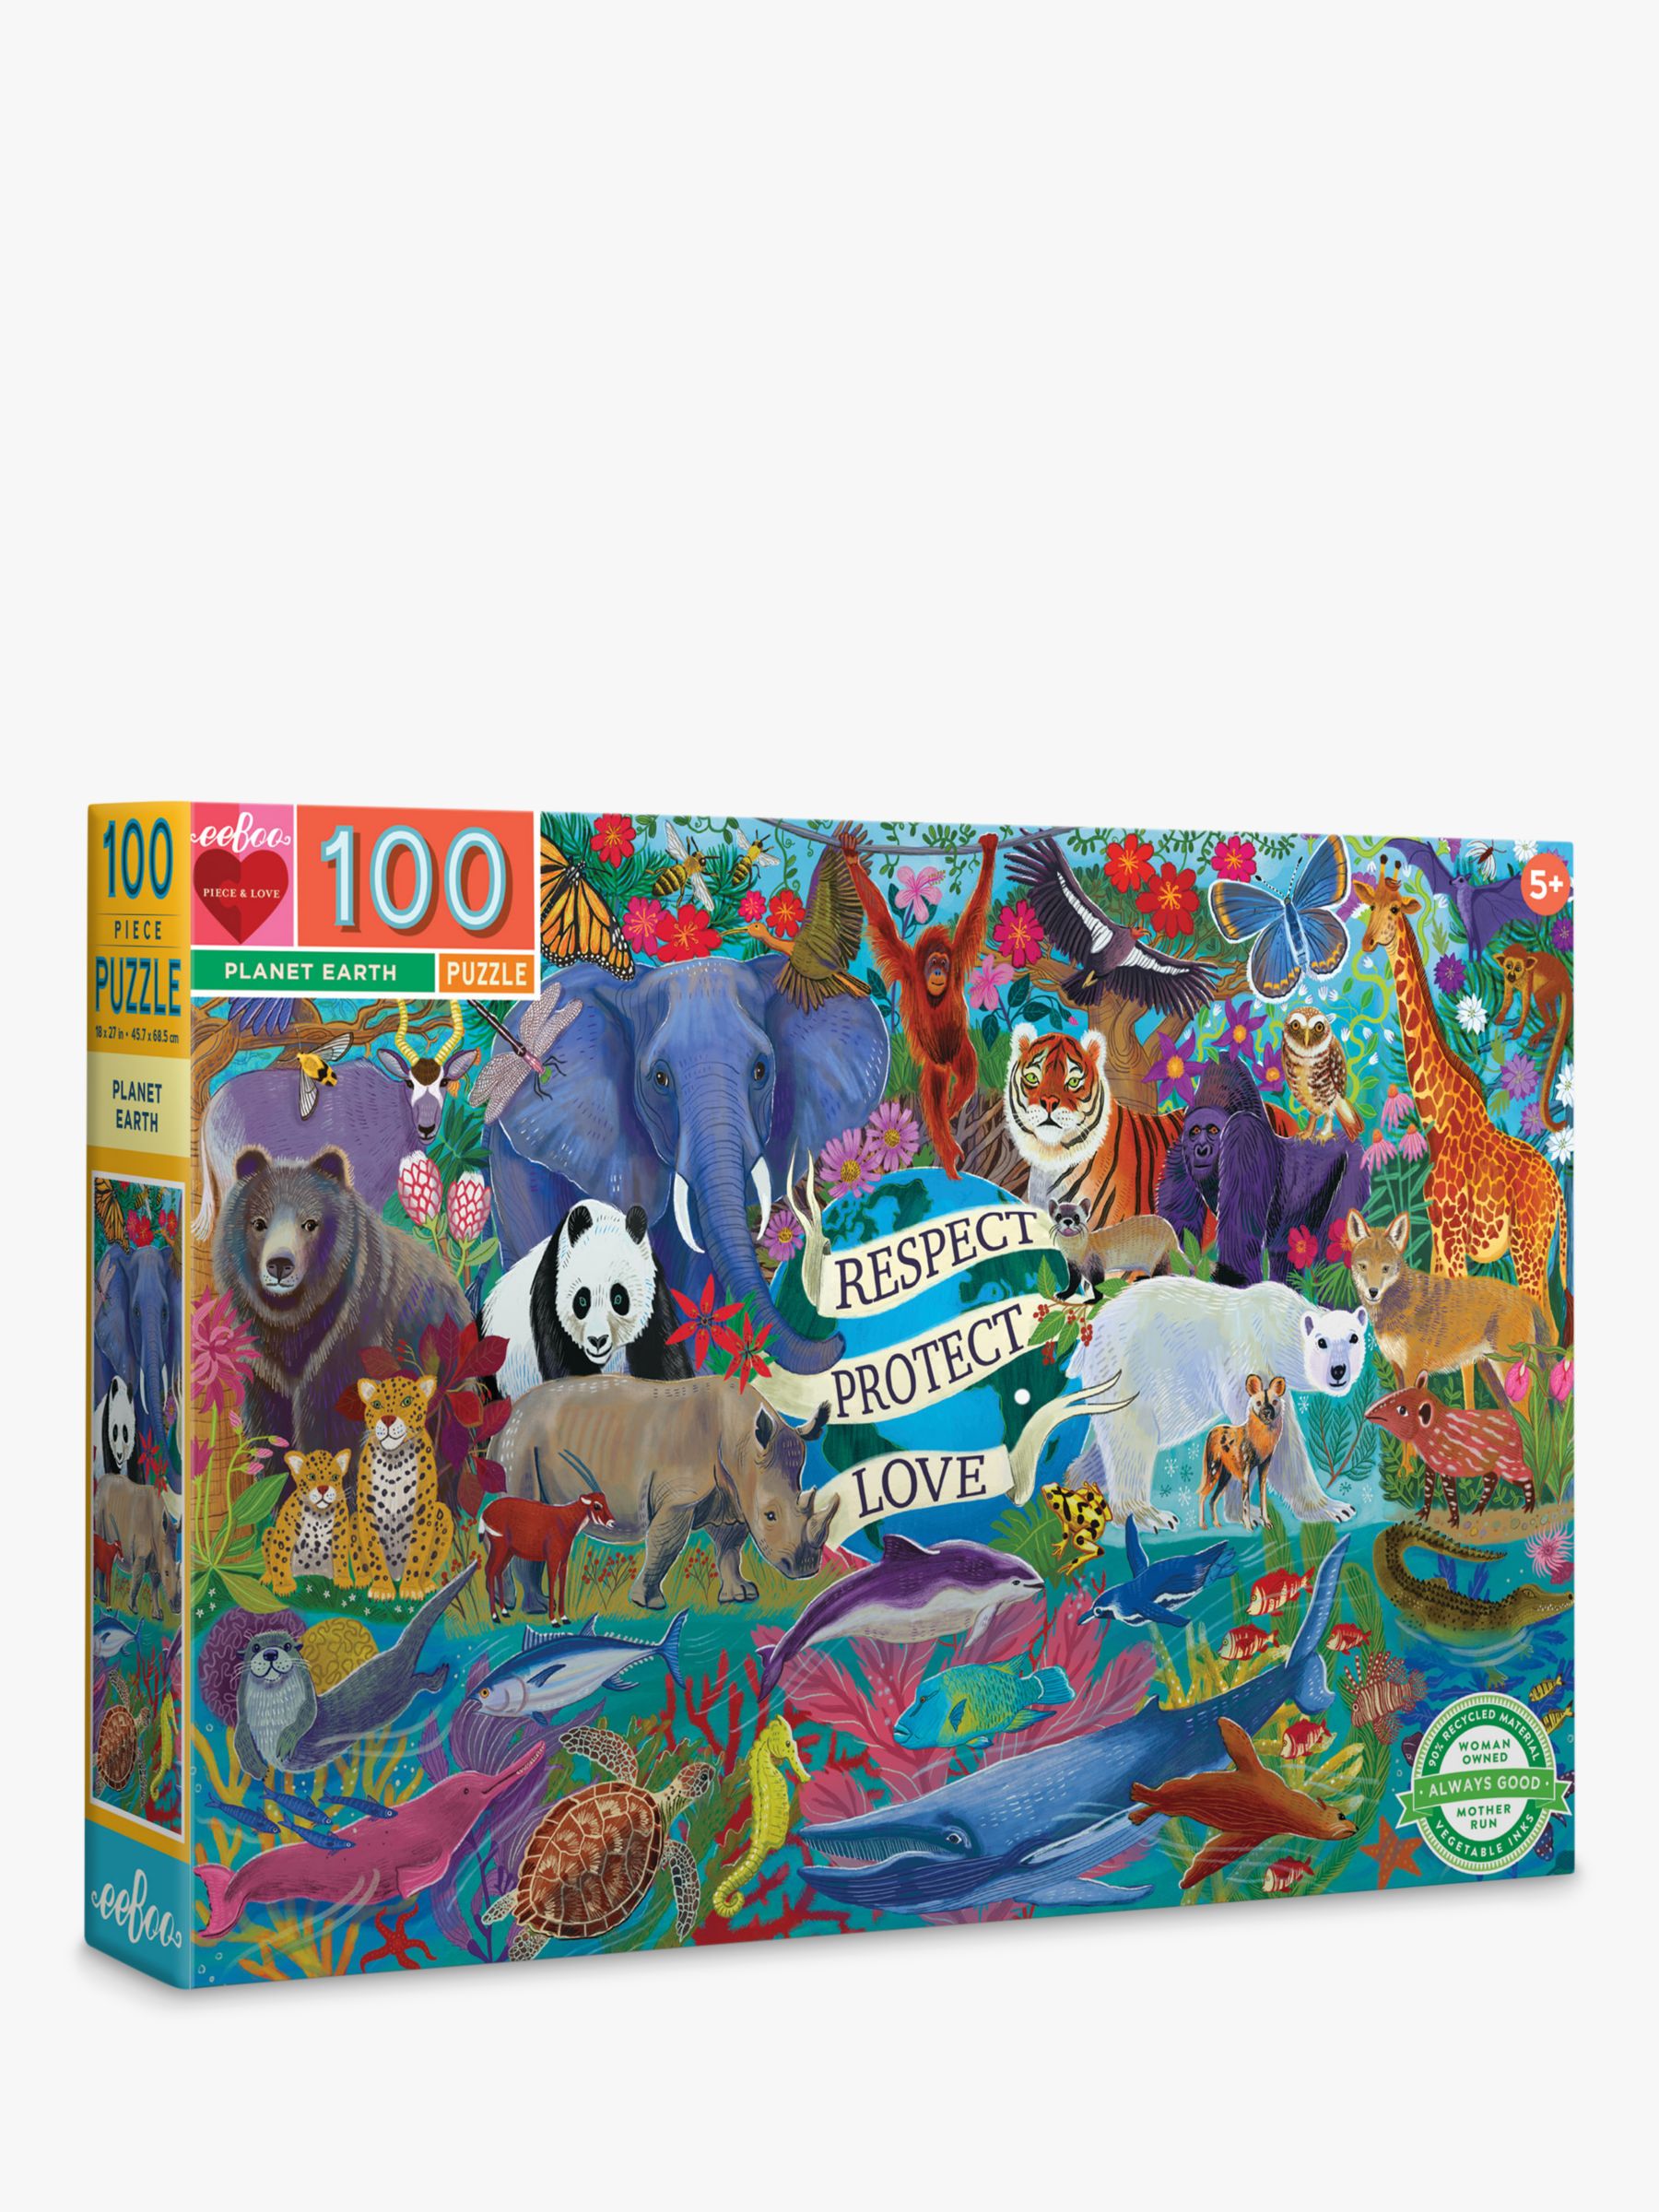 eeBoo Planet Earth Jigsaw Puzzle, 100 Pieces at John Lewis & Partners